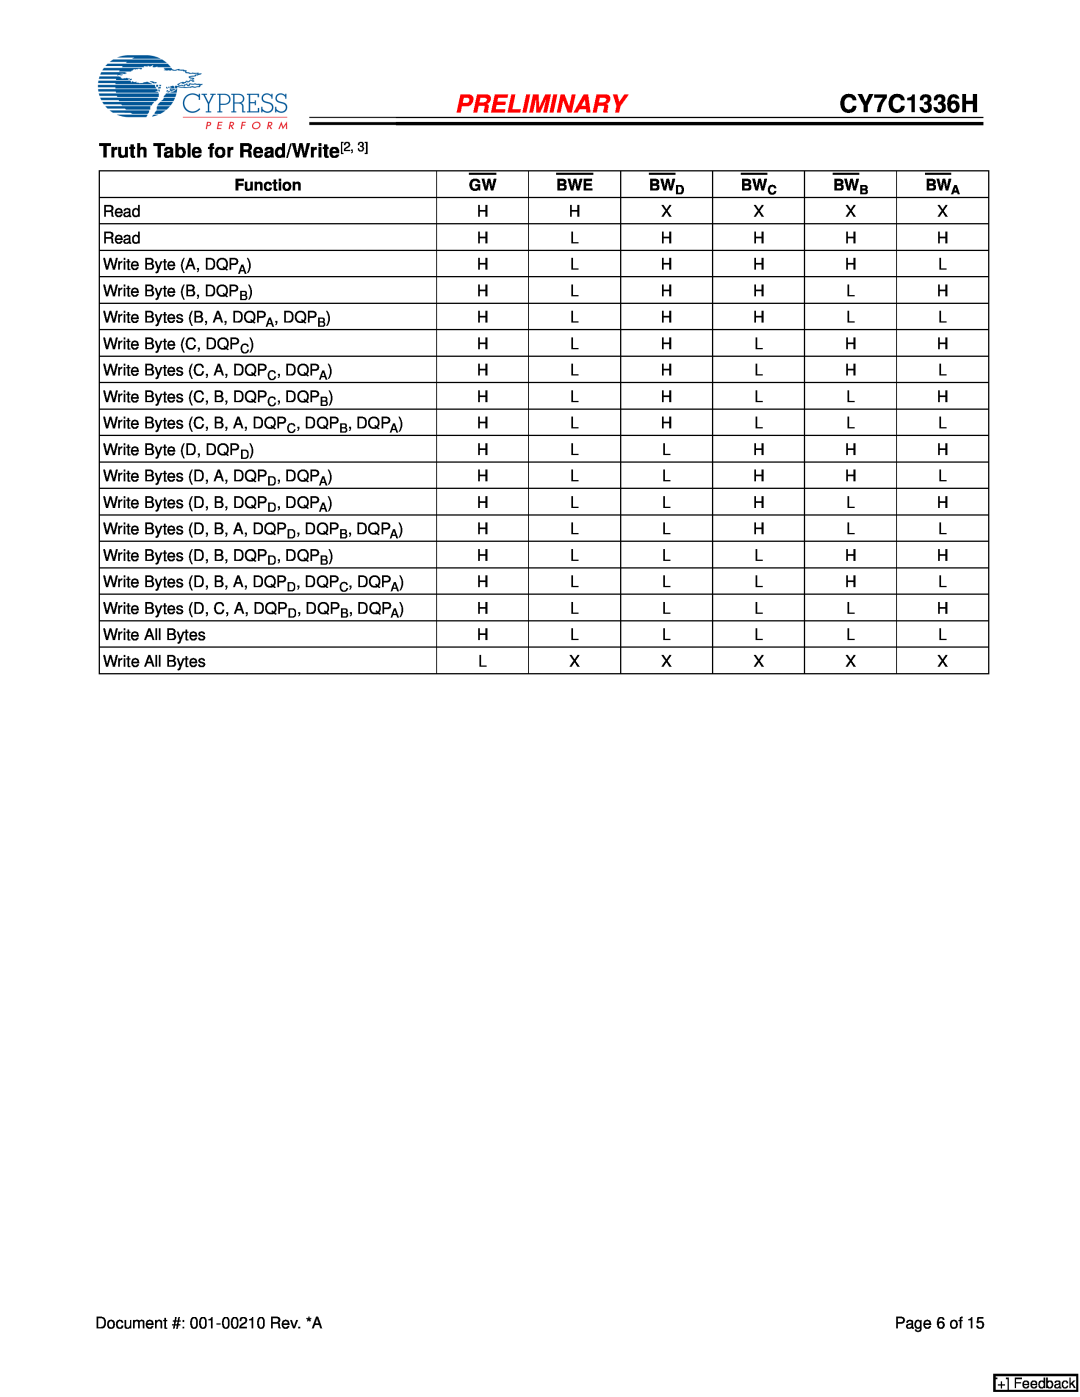 Cypress CY7C1336H manual Truth Table for Read/Write 2, Preliminary 